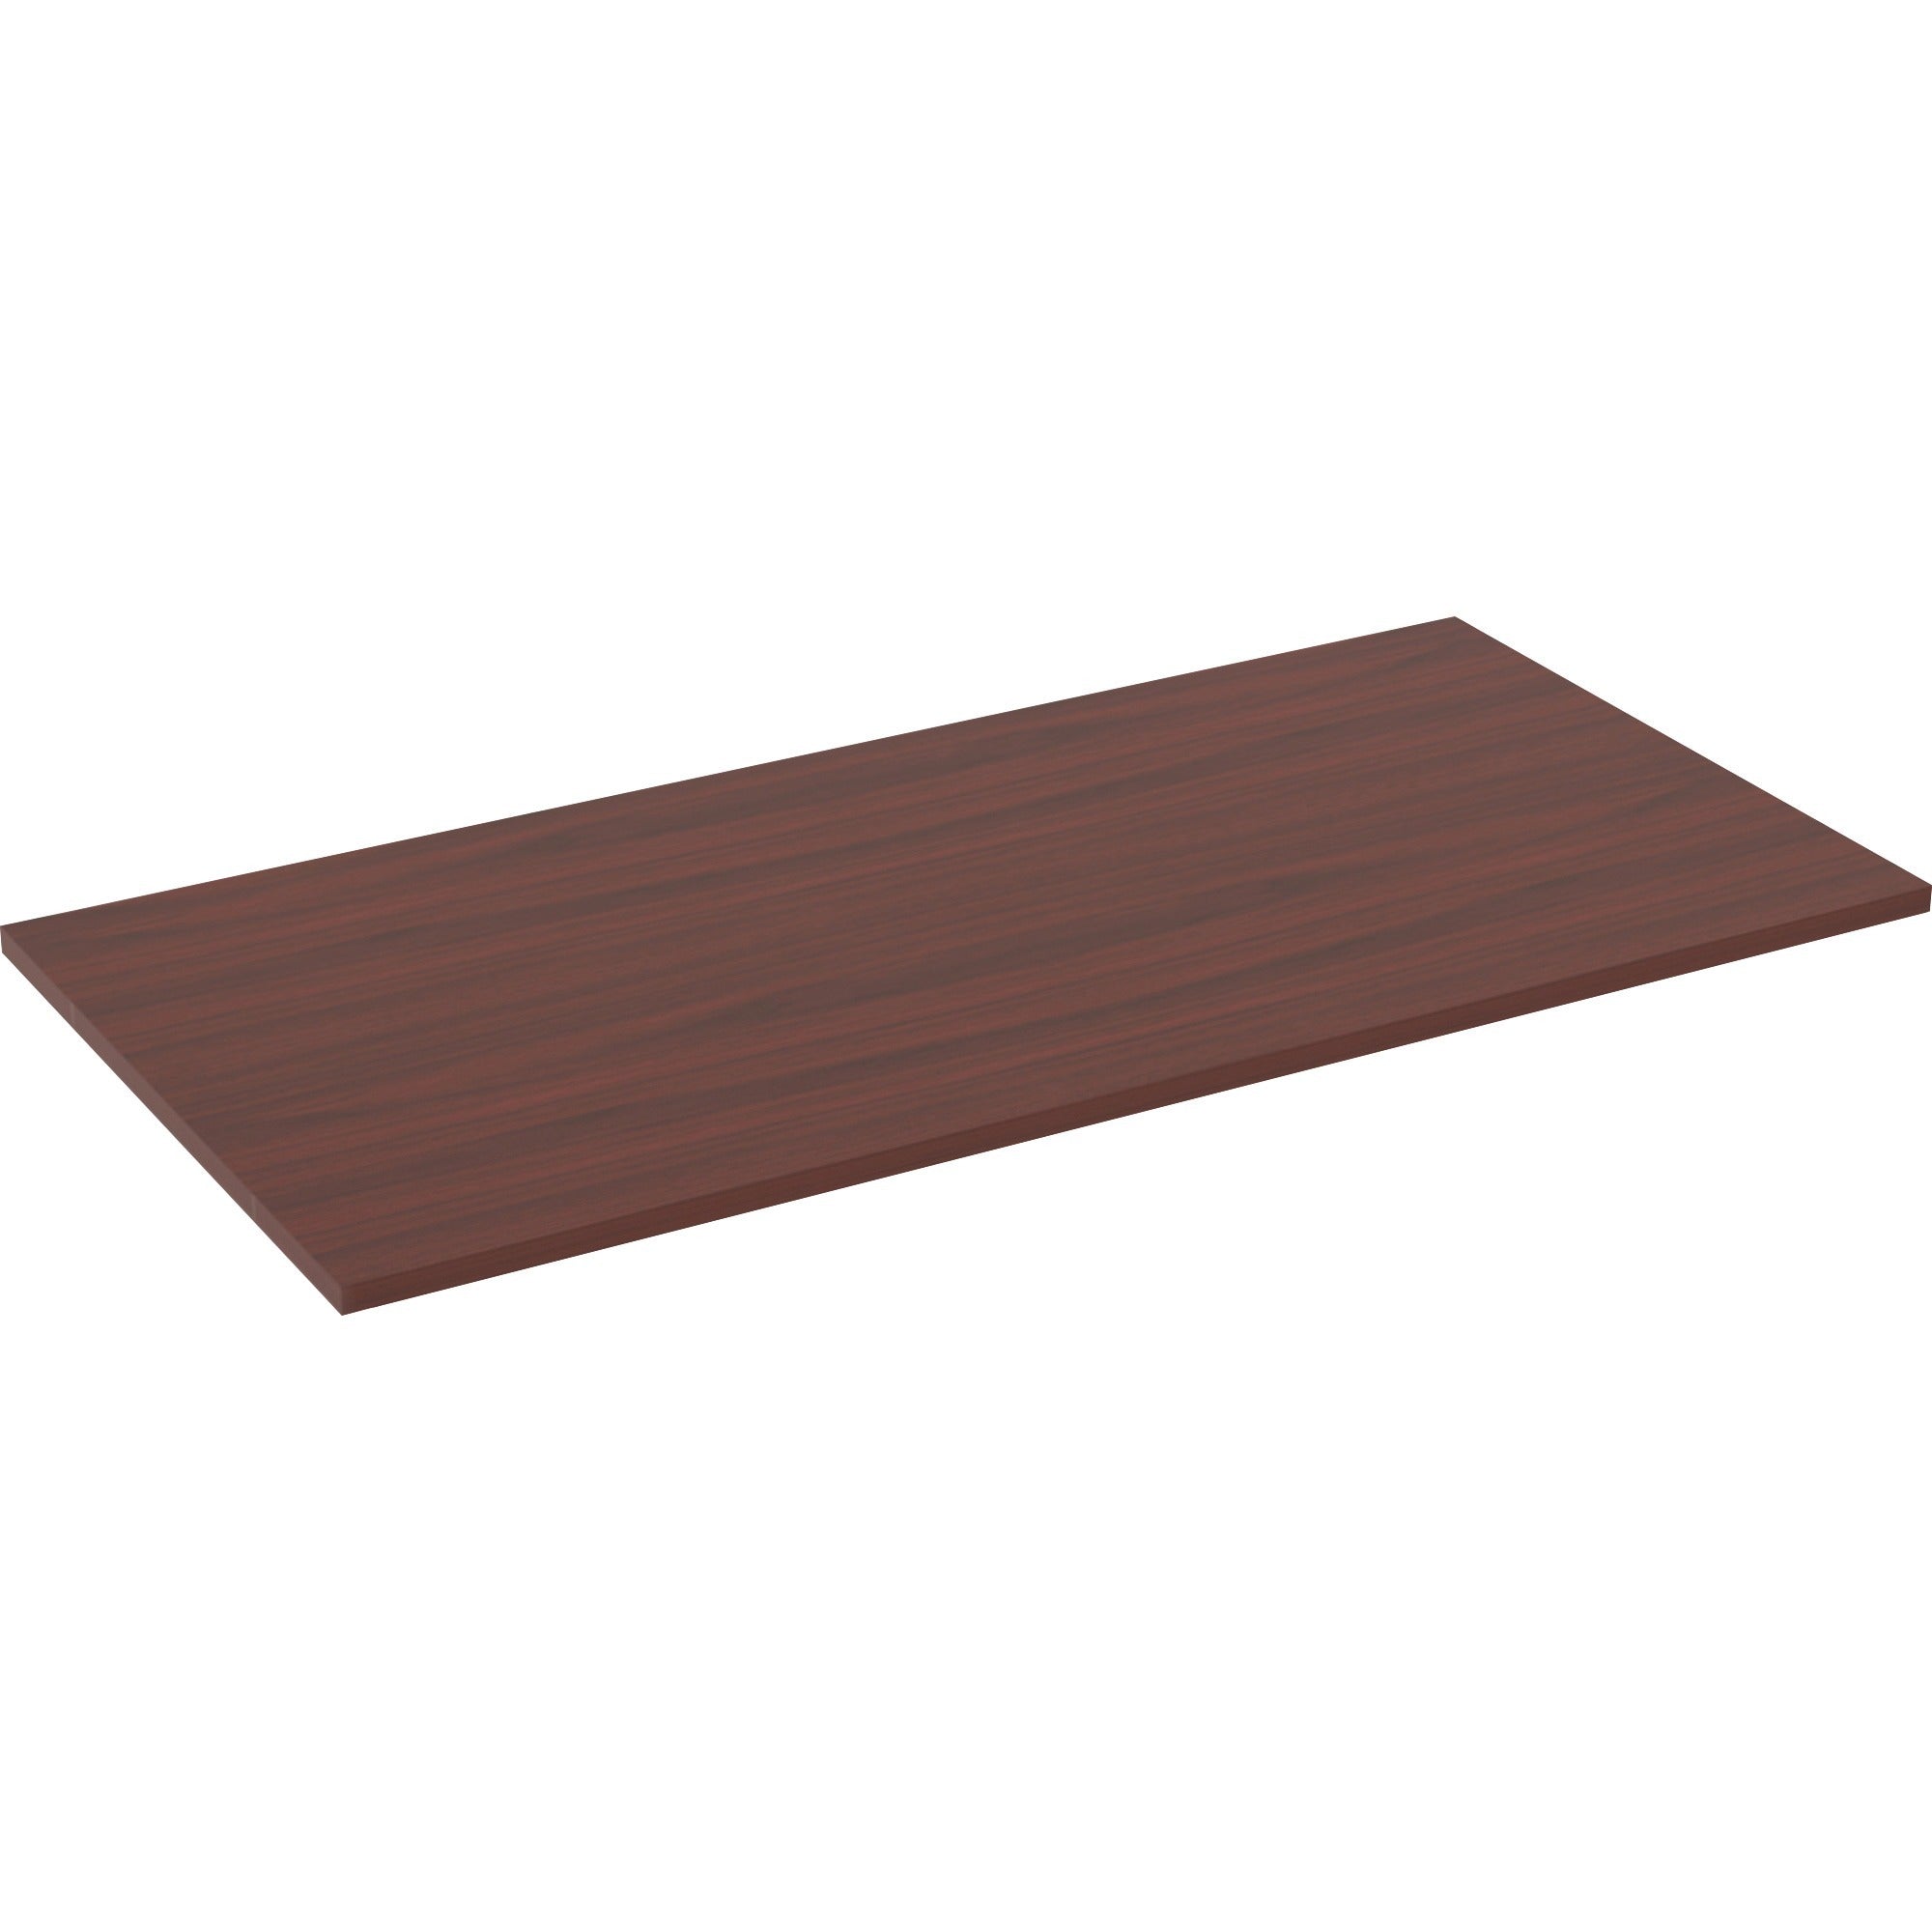 lorell-relevance-series-tabletop-599-x-295-x-1-table-top-straight-edge-finish-mahogany-laminate_llr16200 - 1